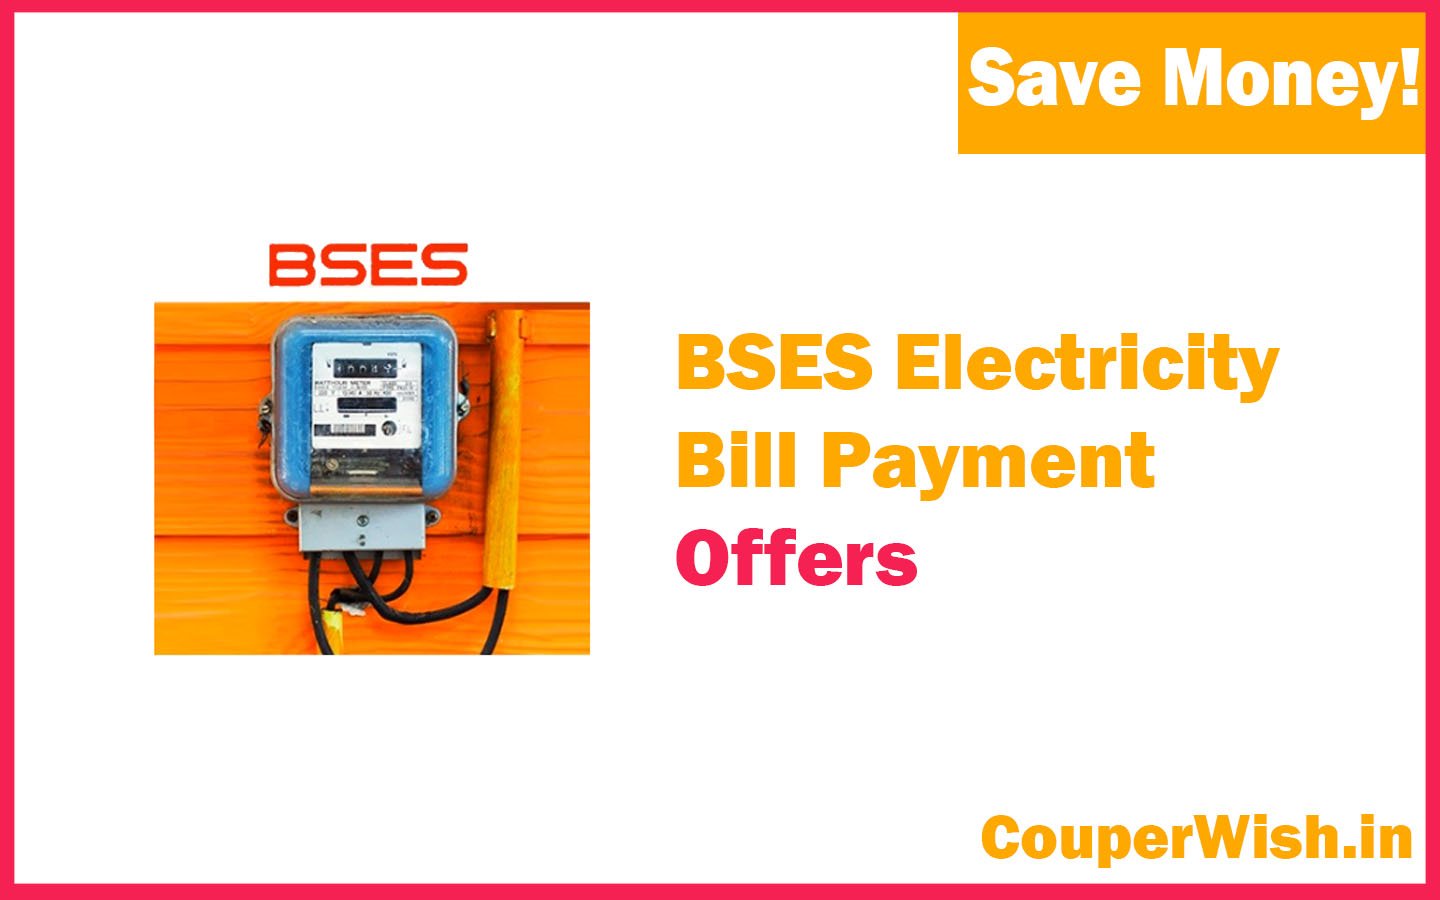 BSES Electricity Bill Payment Offer